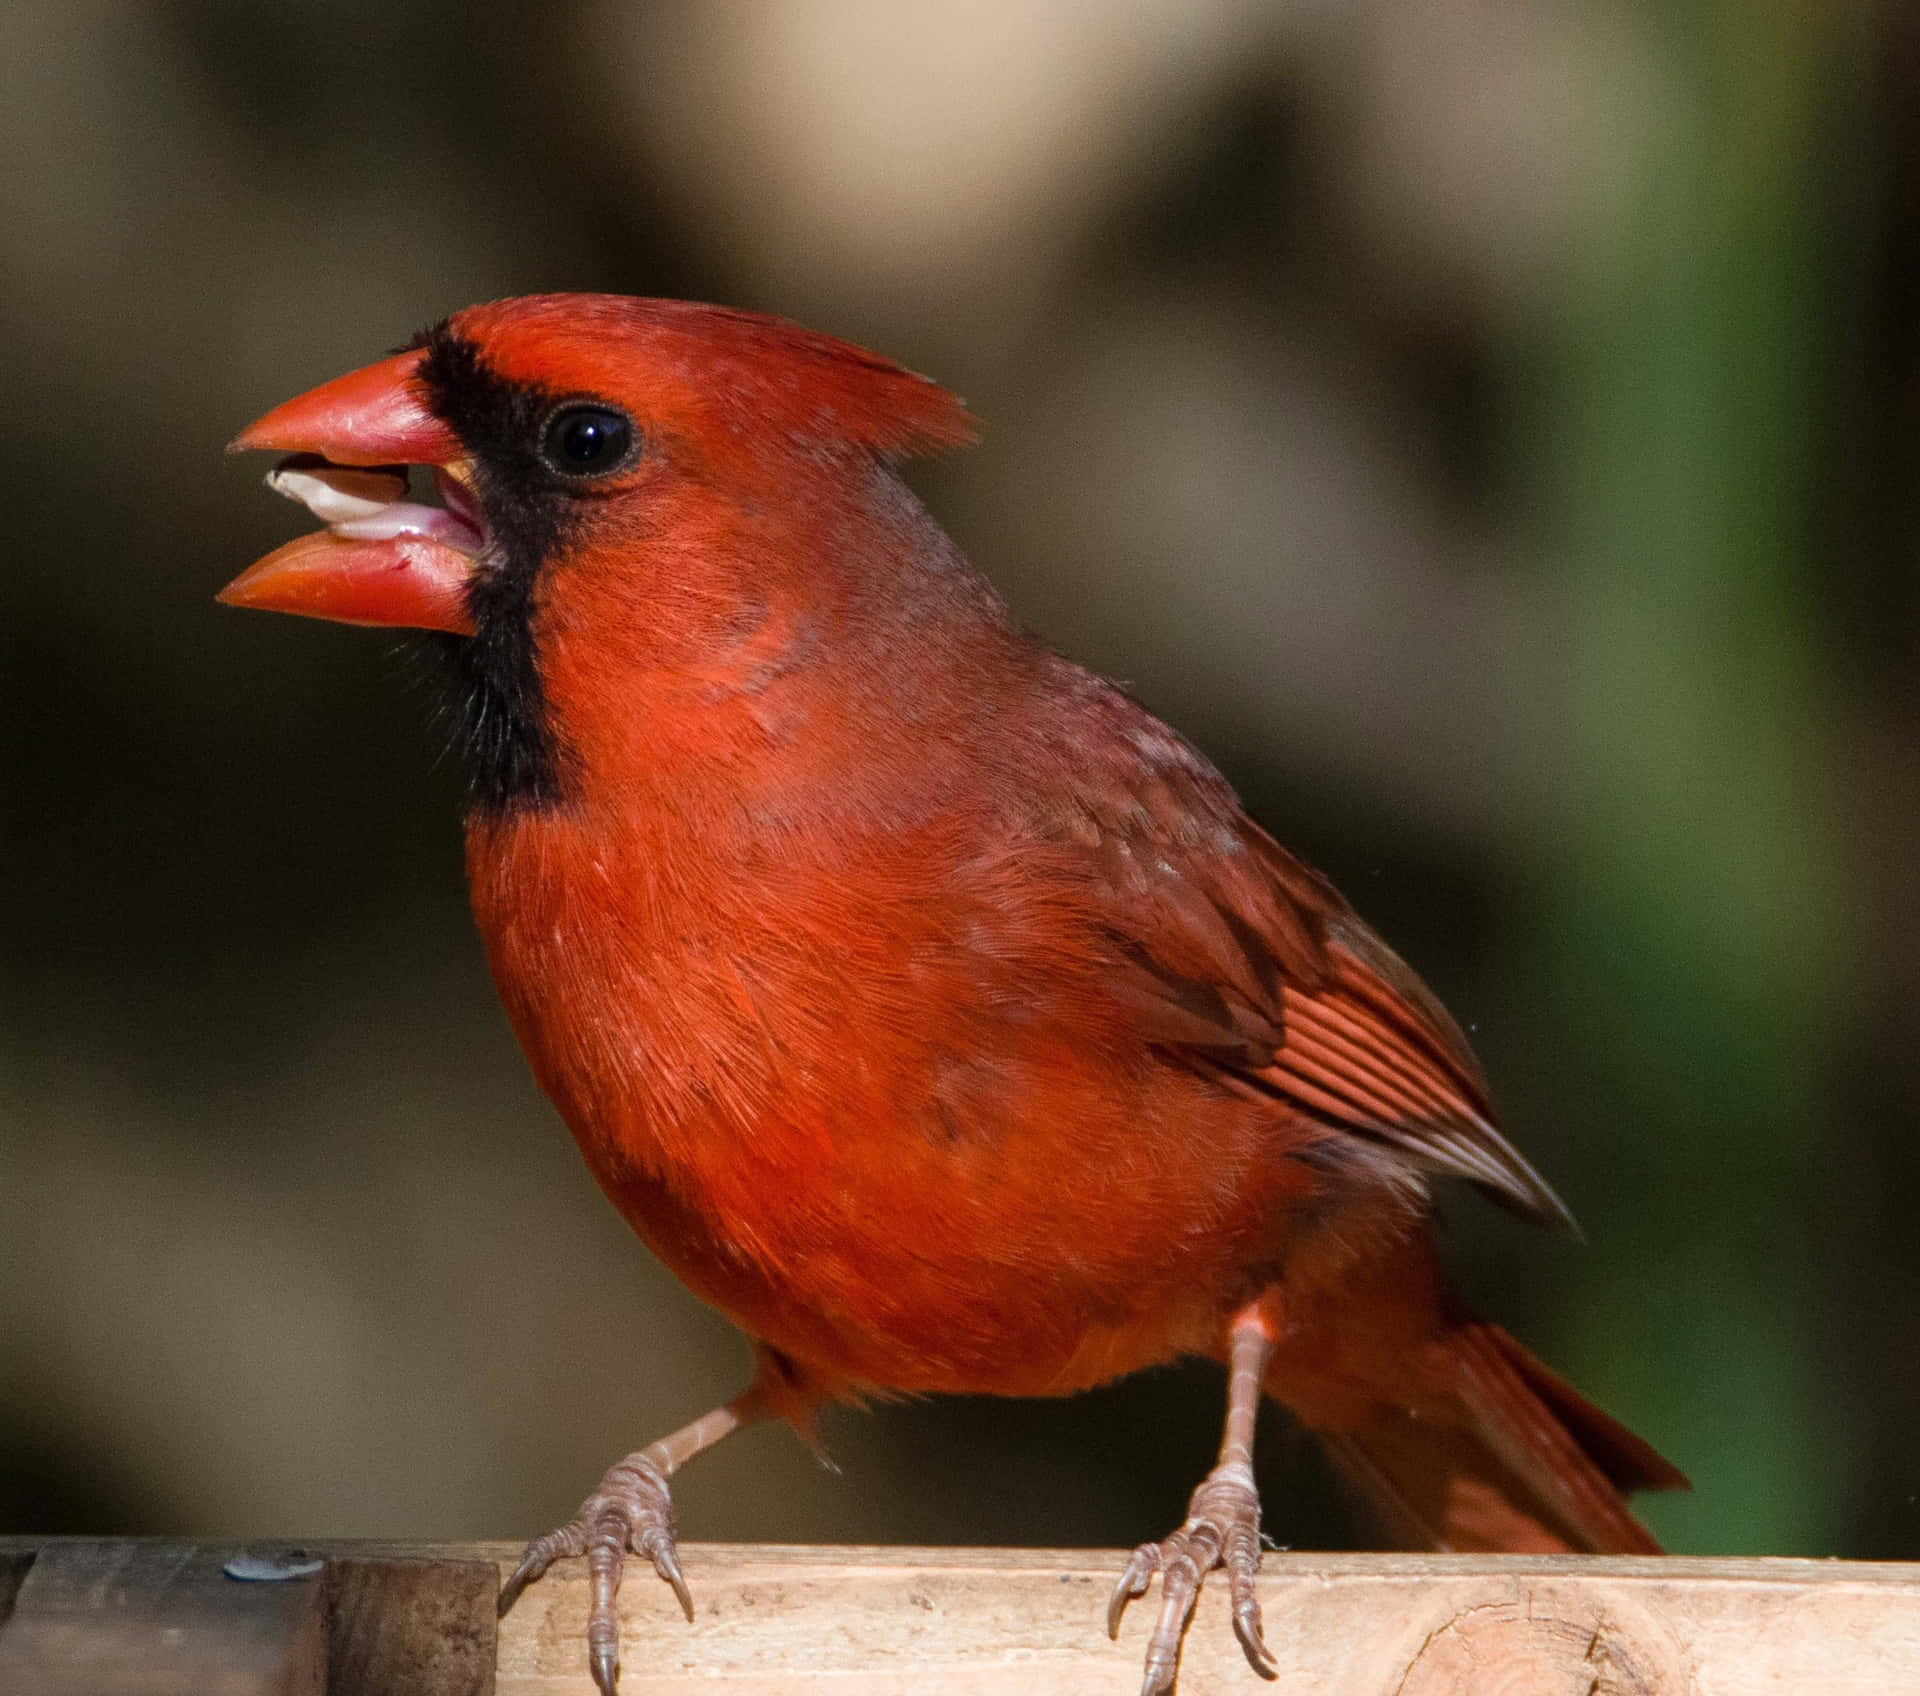 A Red Bird Is Sitting On A Wooden Railing